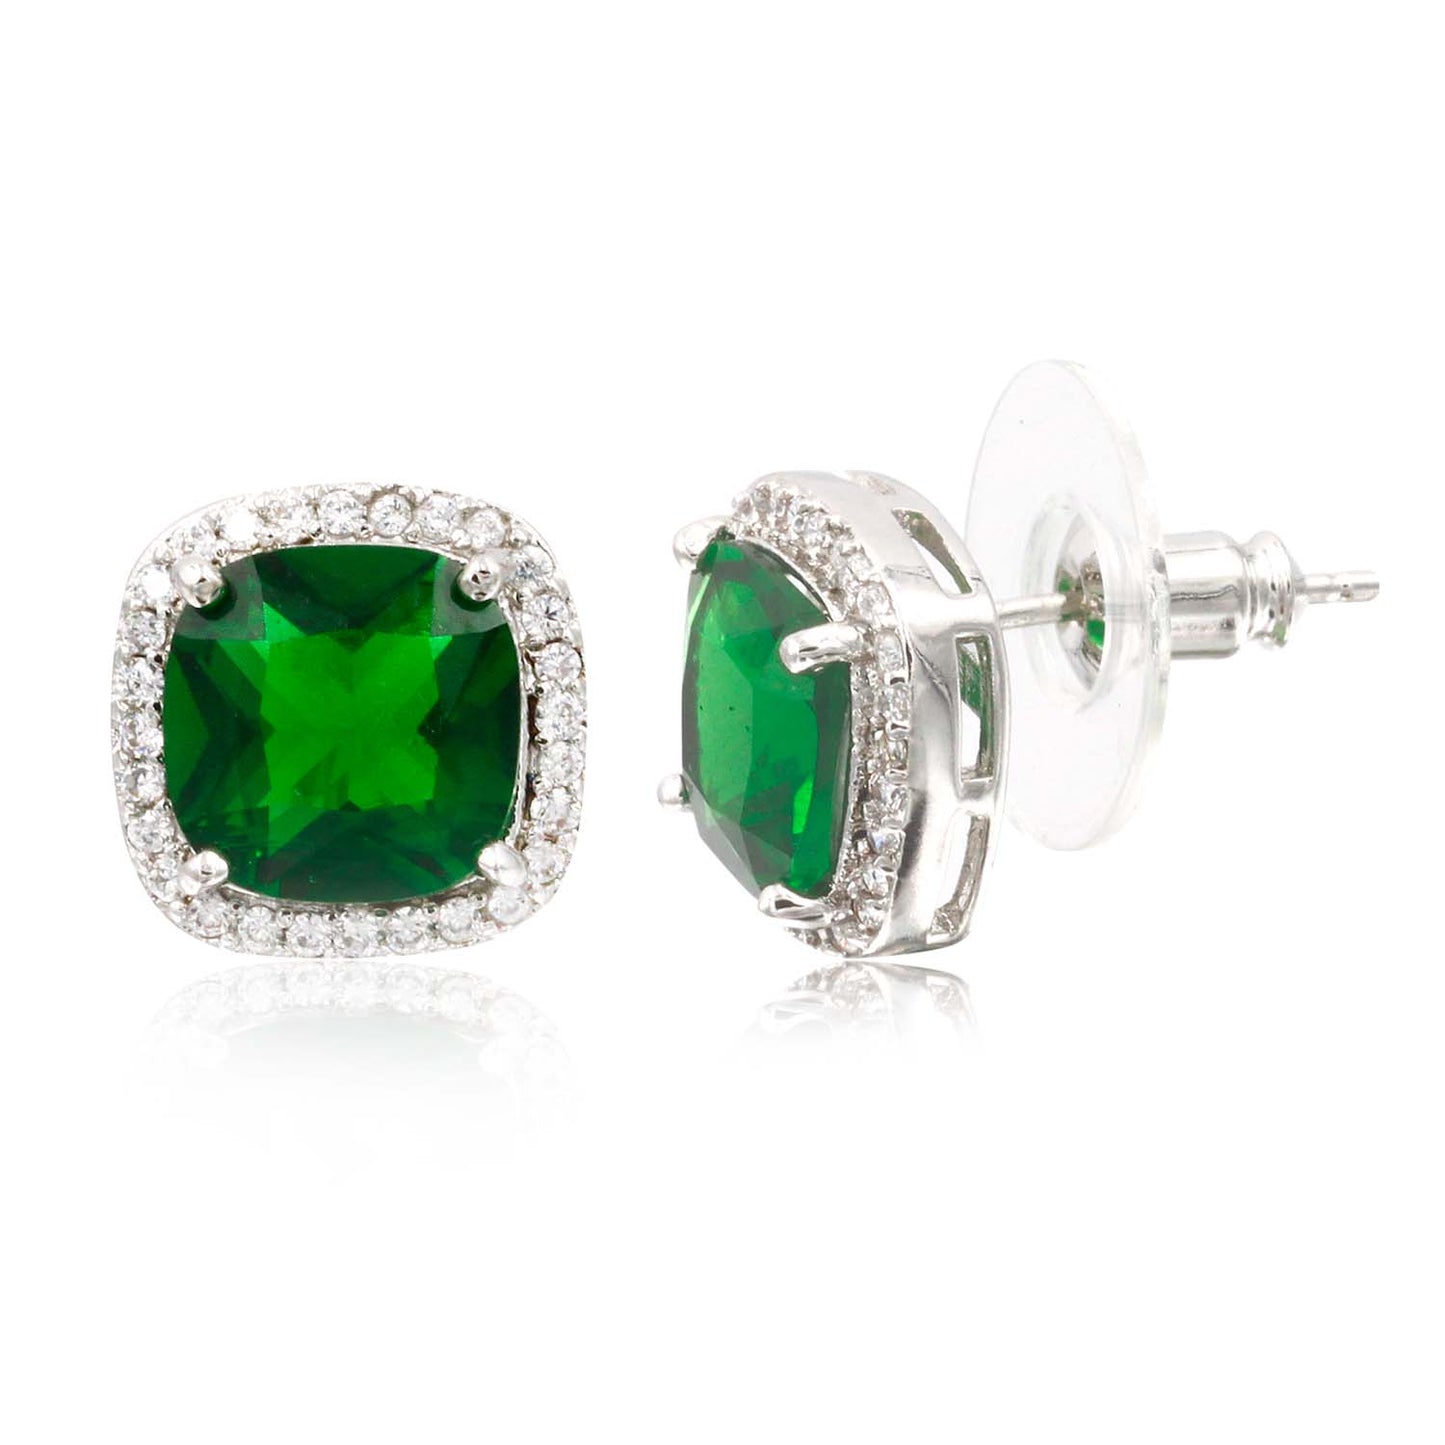 Princess Cut with Micro Paved AAA Emerald Green Cubic Zirconia Stud Earrings